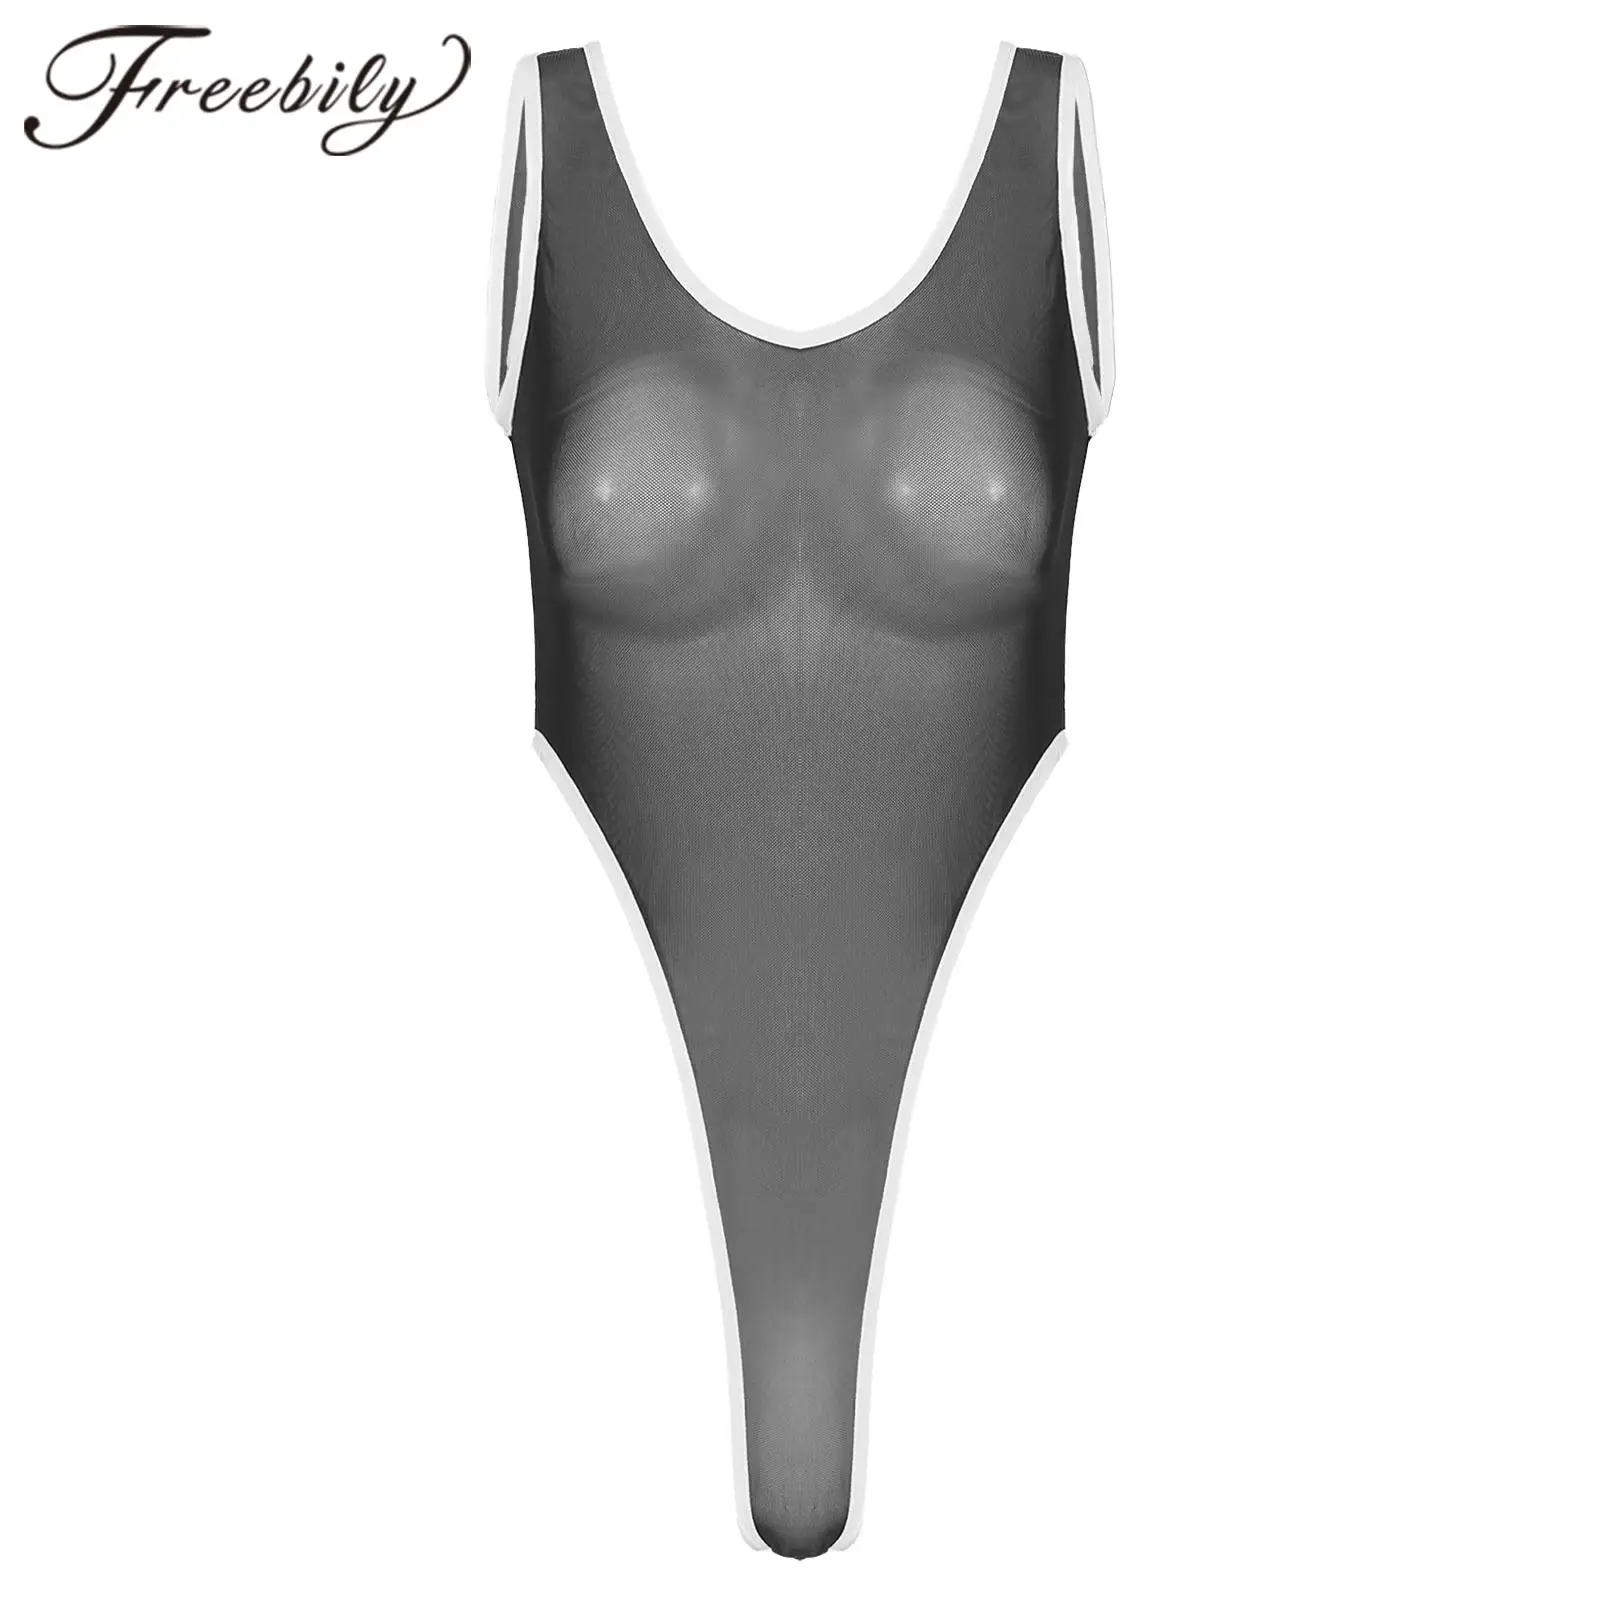 

Womens Monokini Swimsuit Sexy One-piece See Through Sheer Mesh Lingerie Backless High Cut Thong Bodysuit Swimwear Bathing Suit